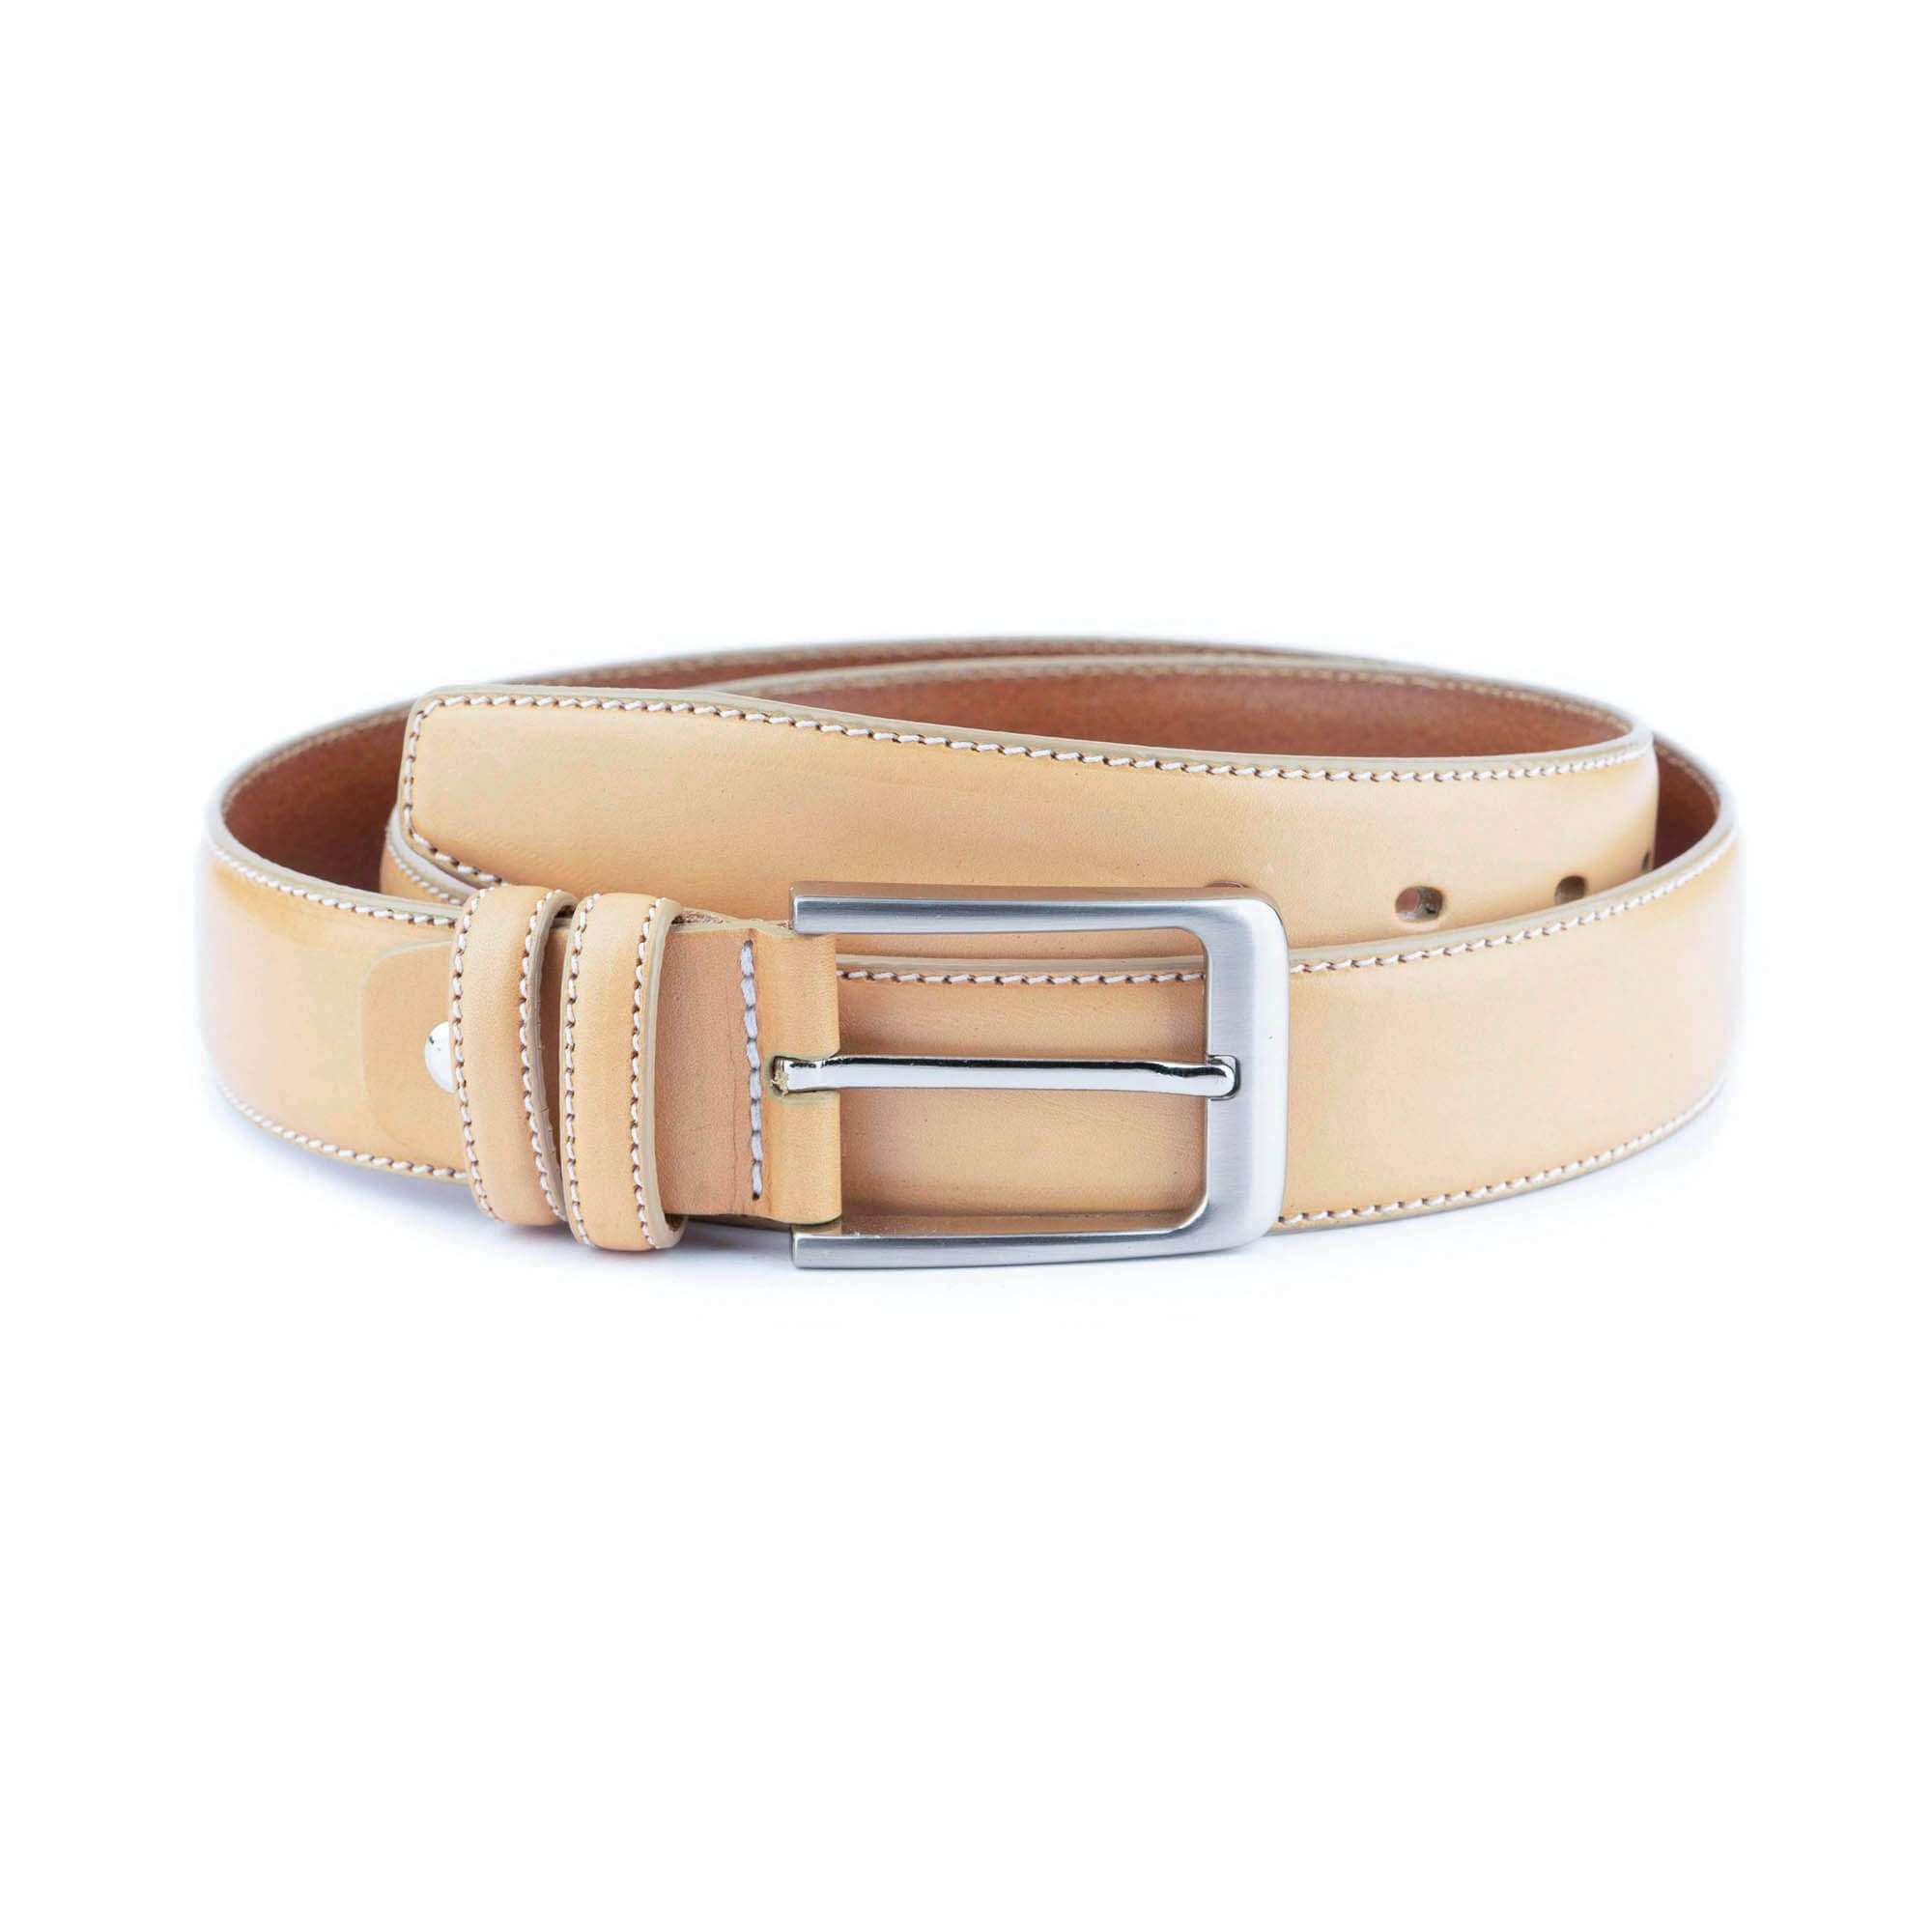 Buy Classic Mens Beige Belt For Trousers - Real Leather